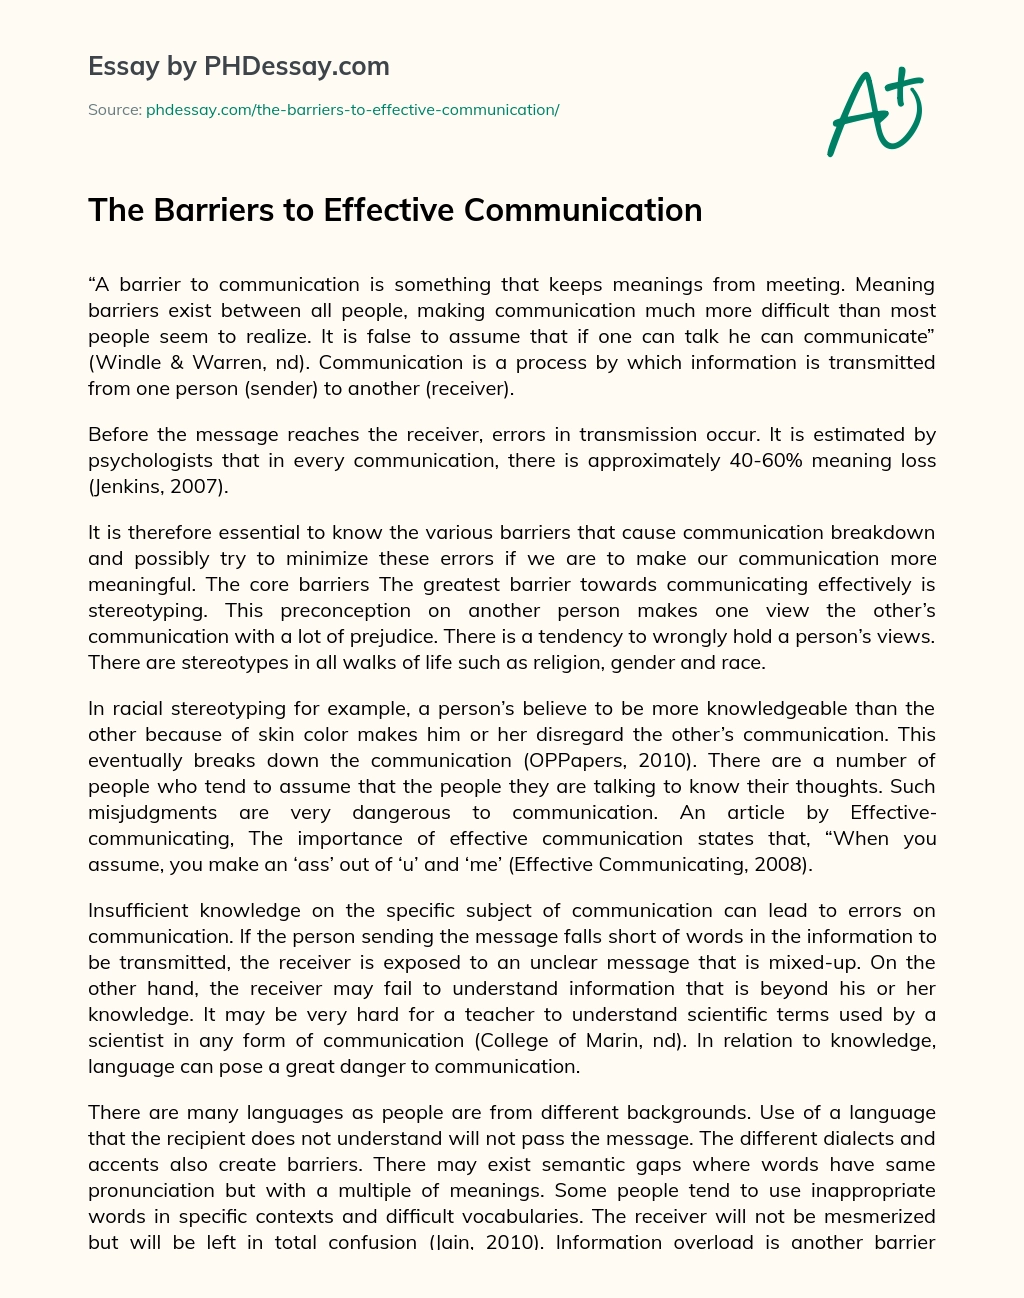 The Barriers to Effective Communication essay